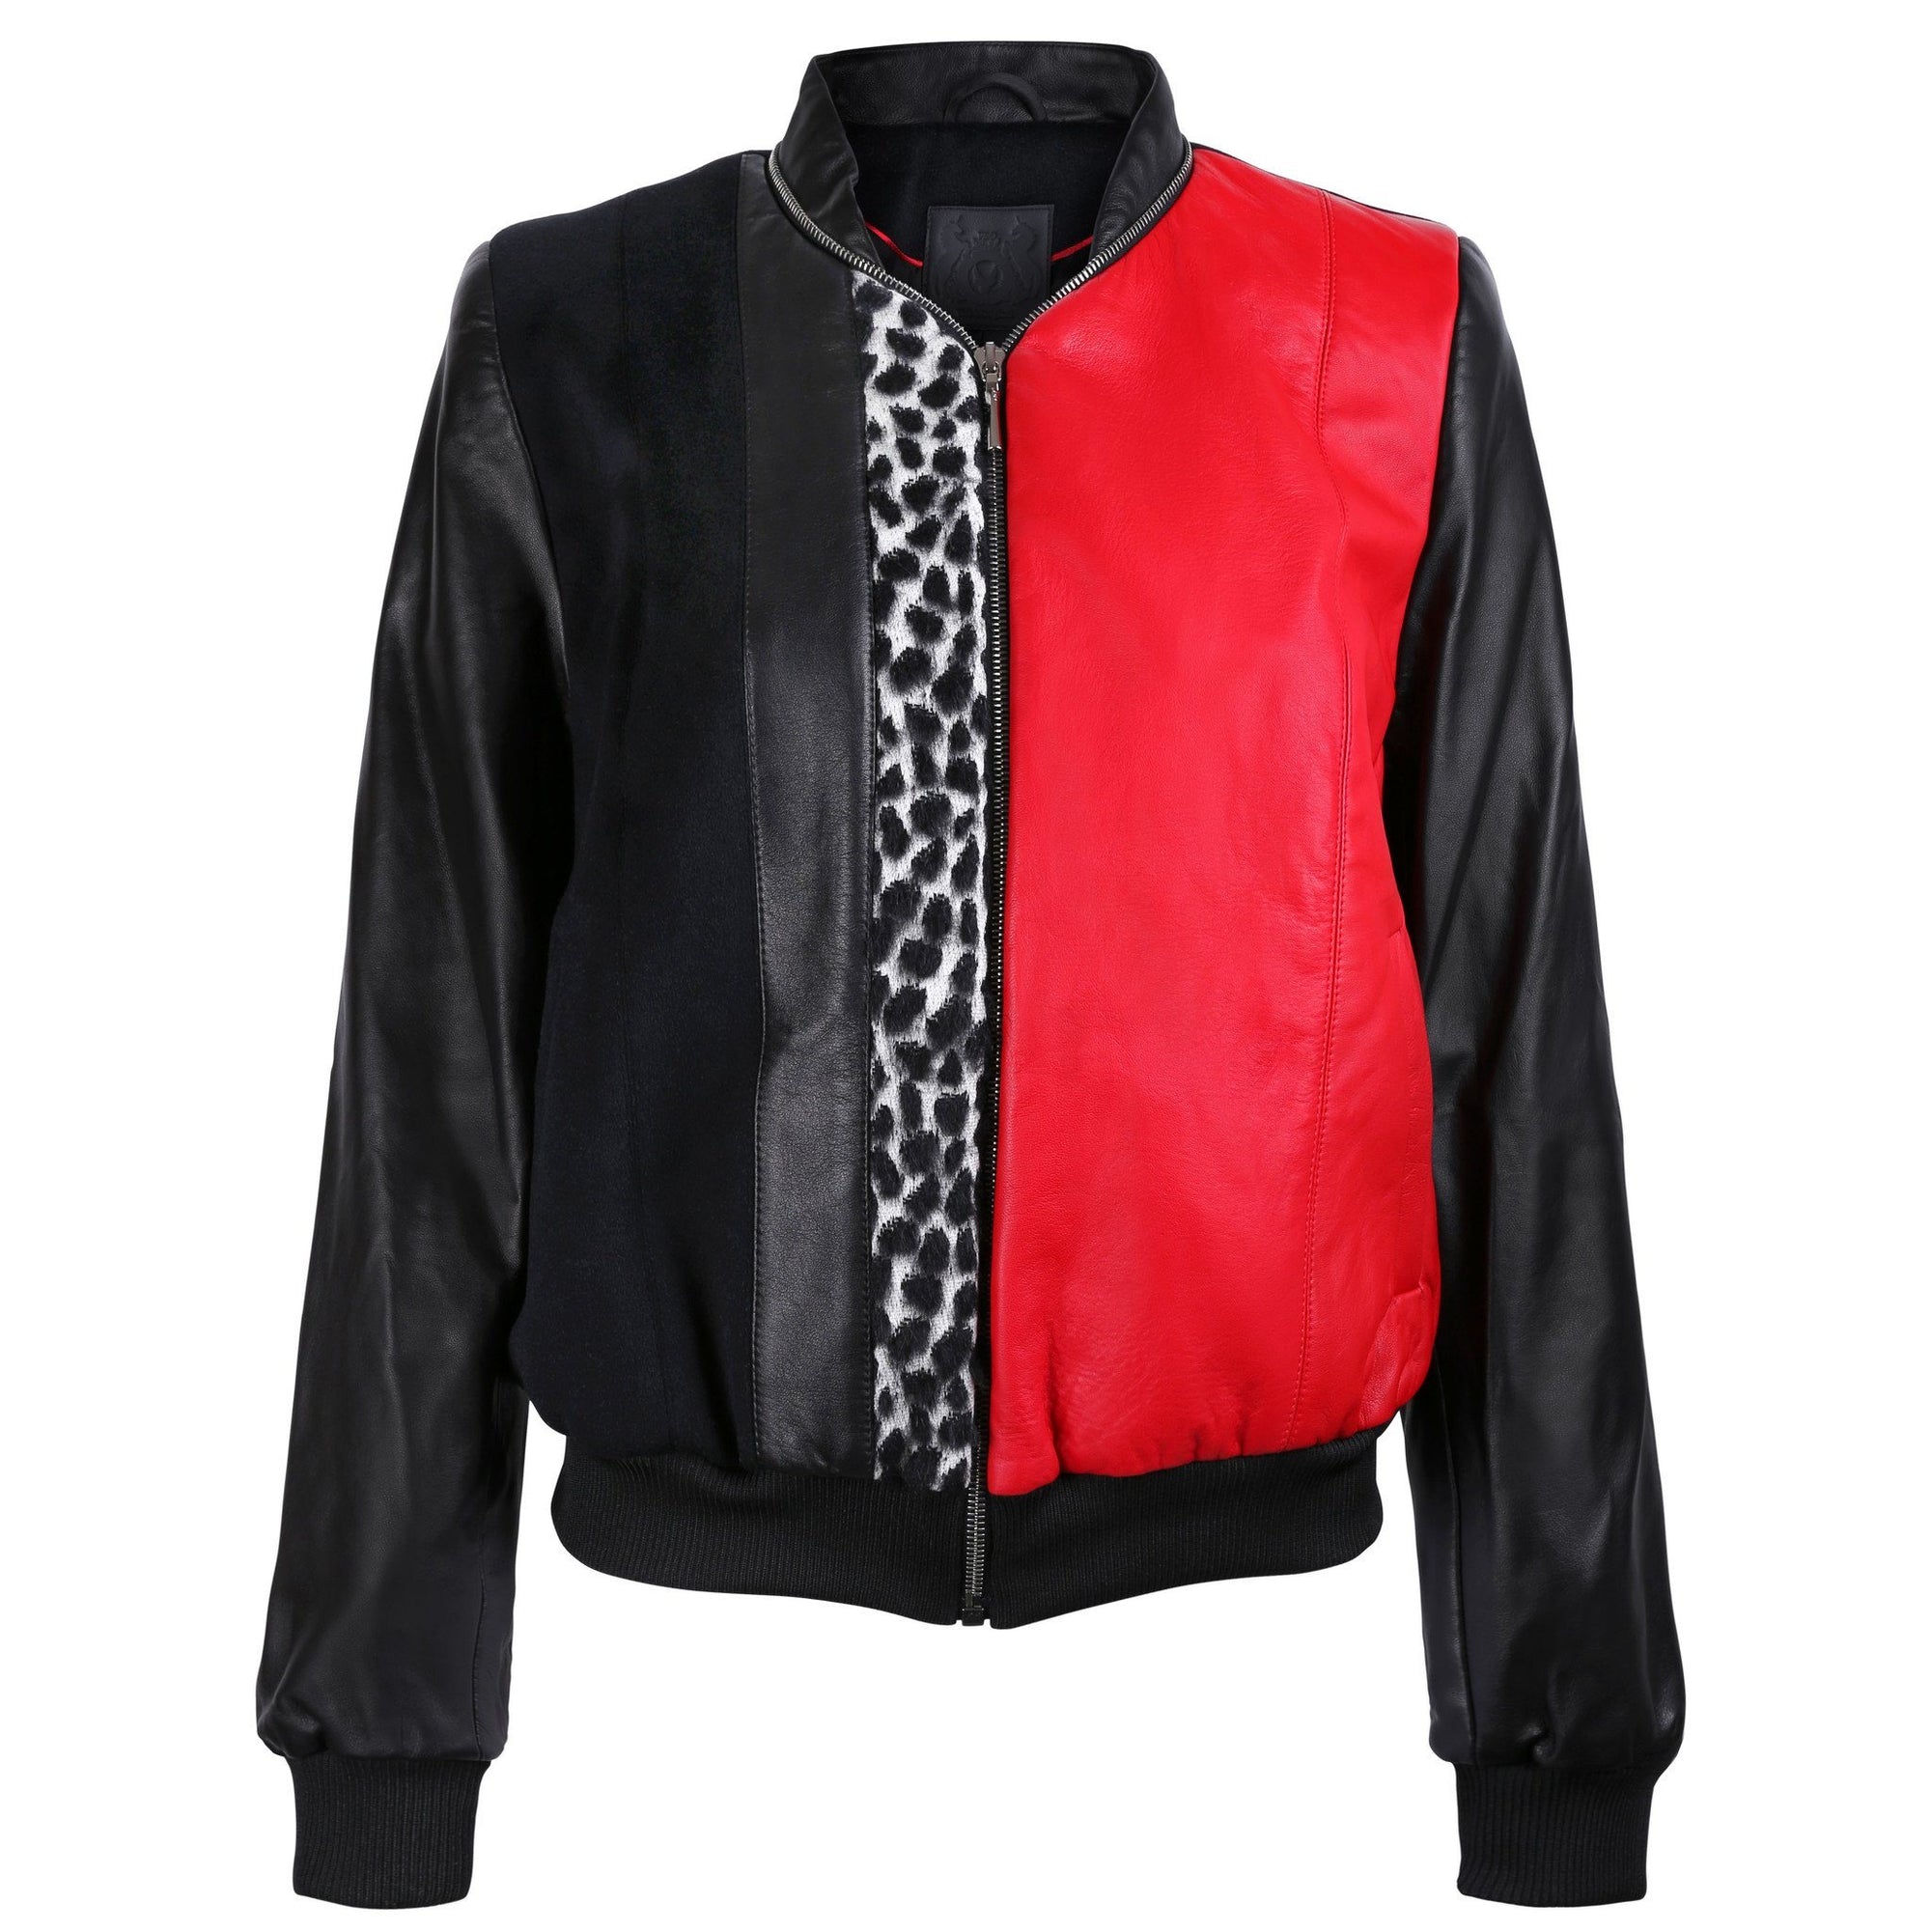 Black and Red Leather Bomber Jacket with Leopard Print Motif - VOLS & ORIGINAL